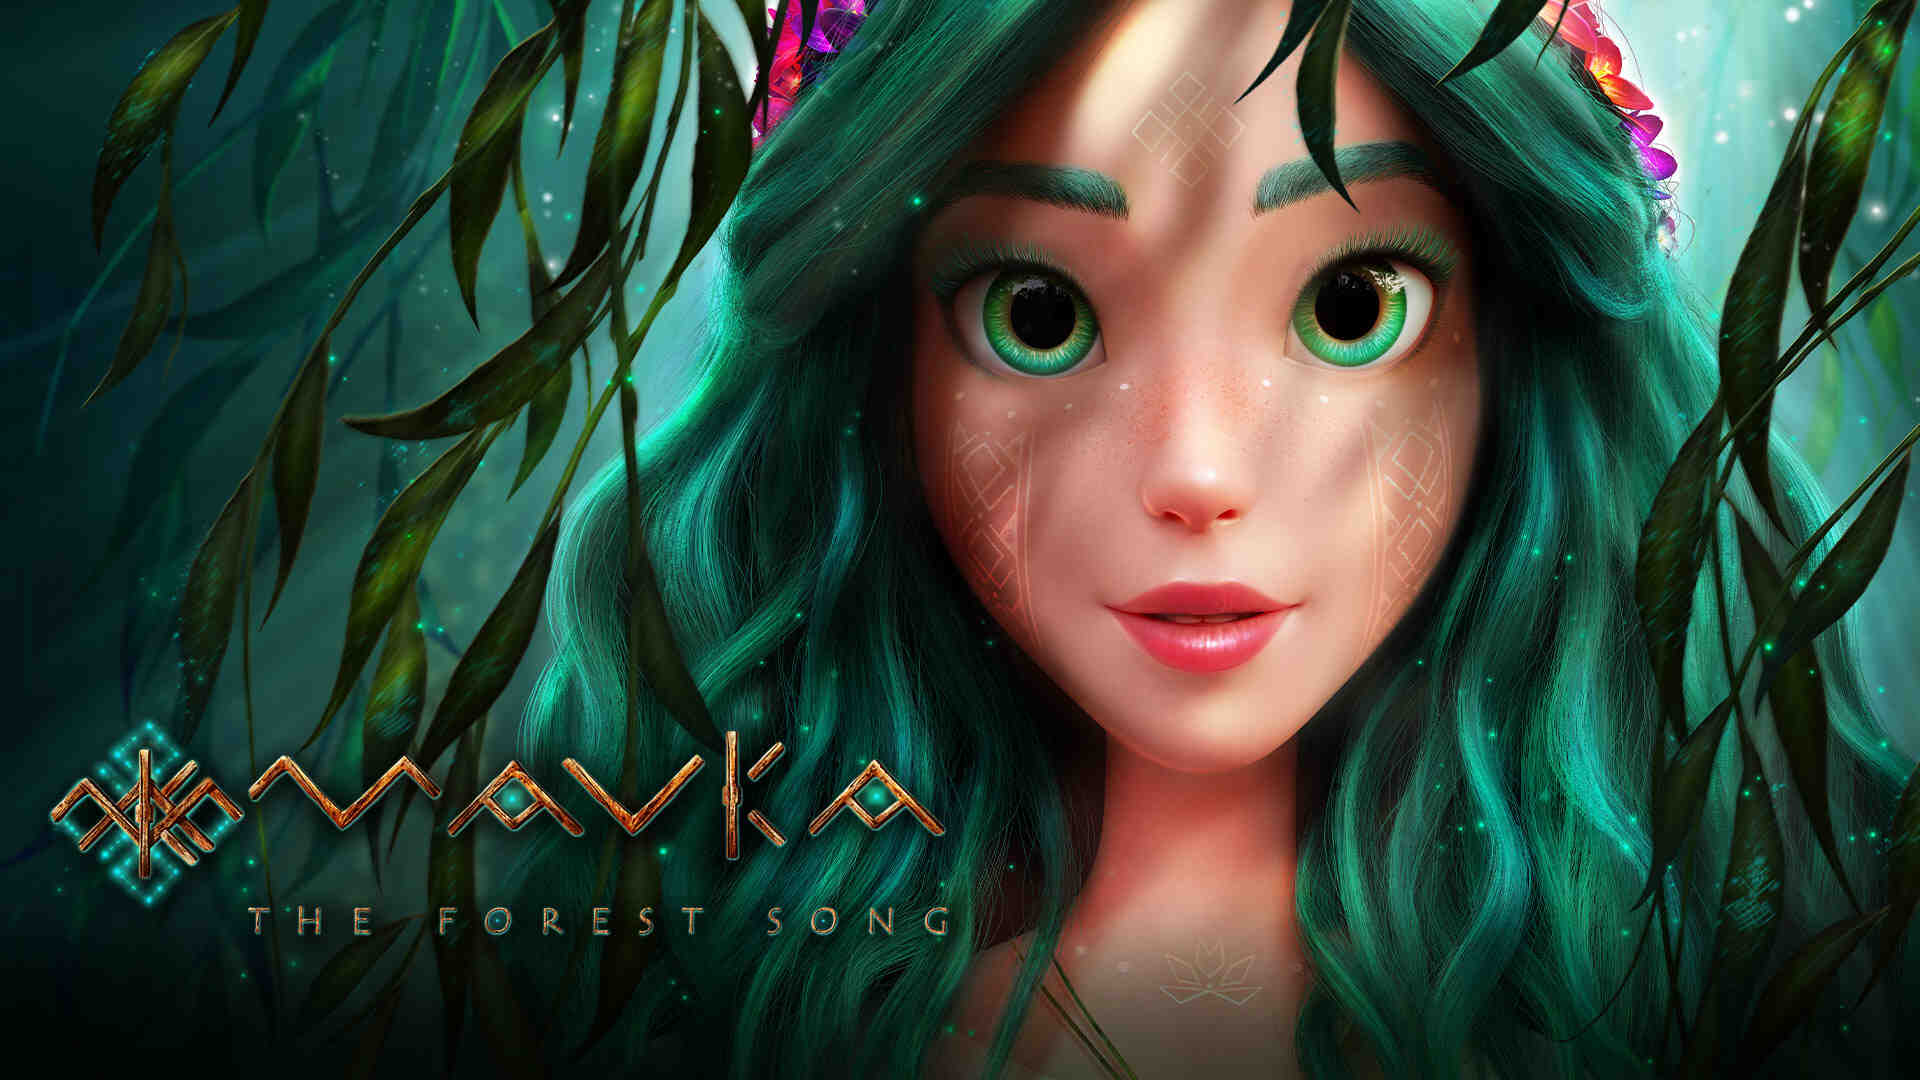 Mavka: The Forest Song